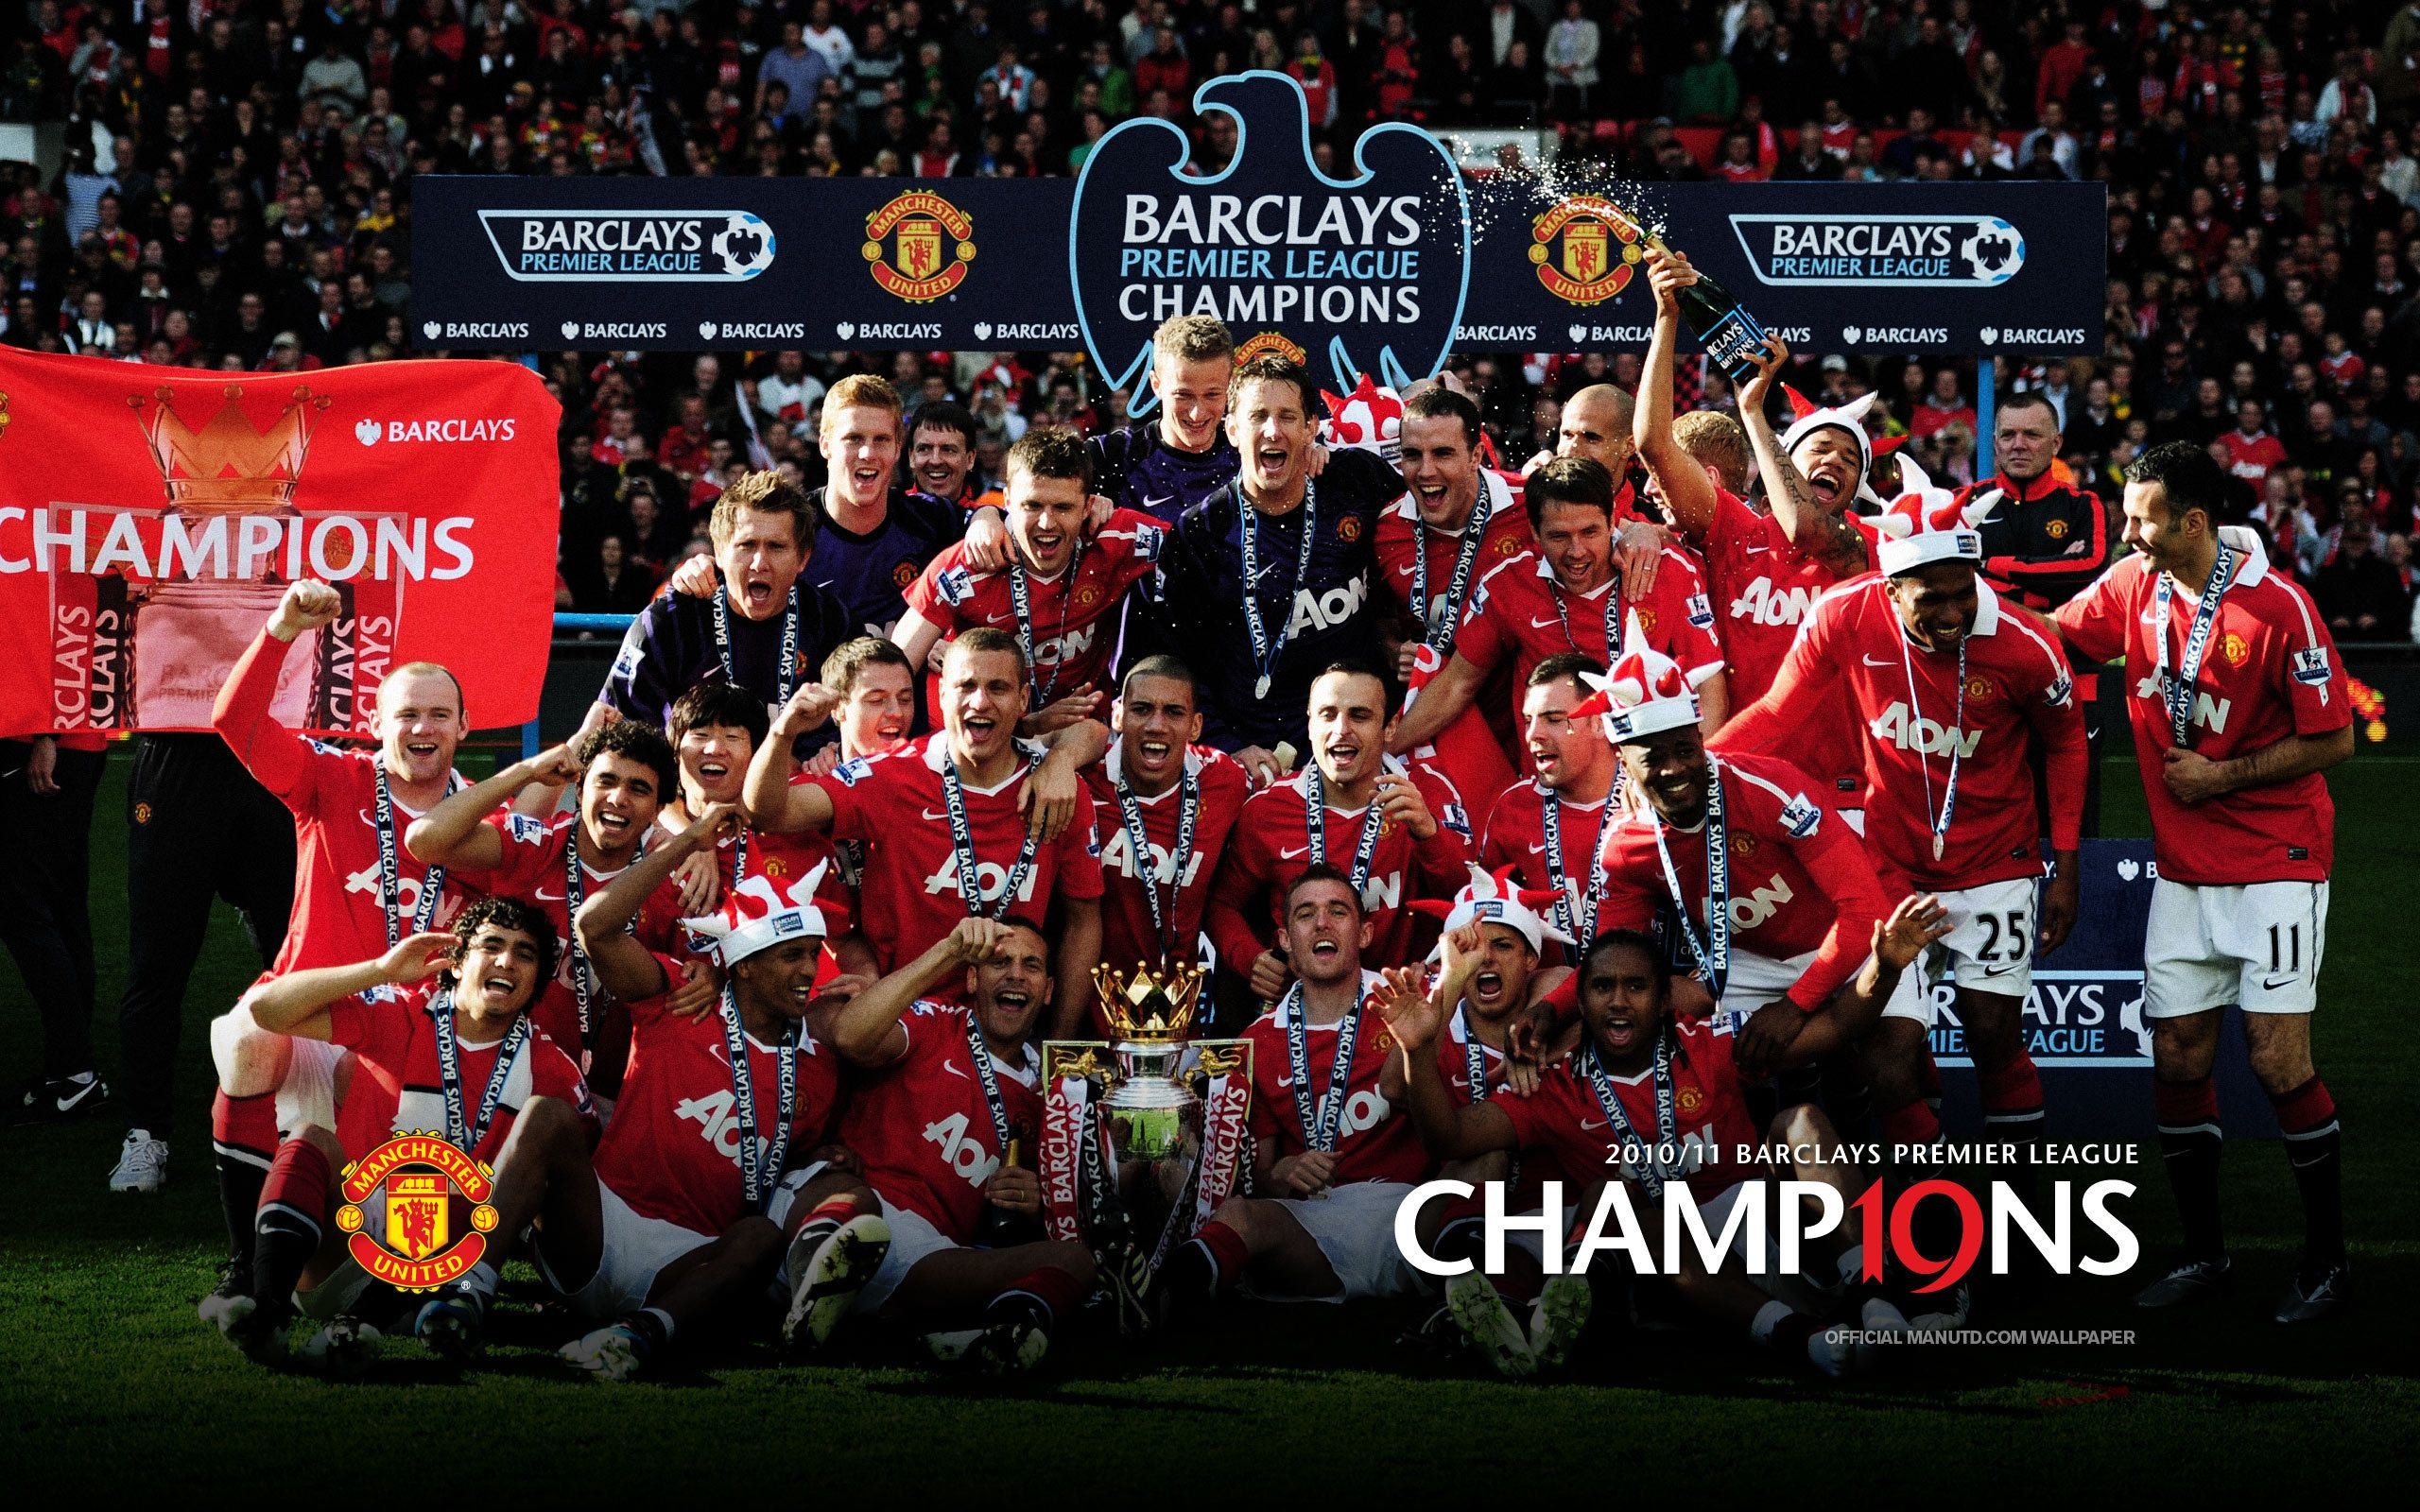 Manchester United Wallpaper HD (68+ images)